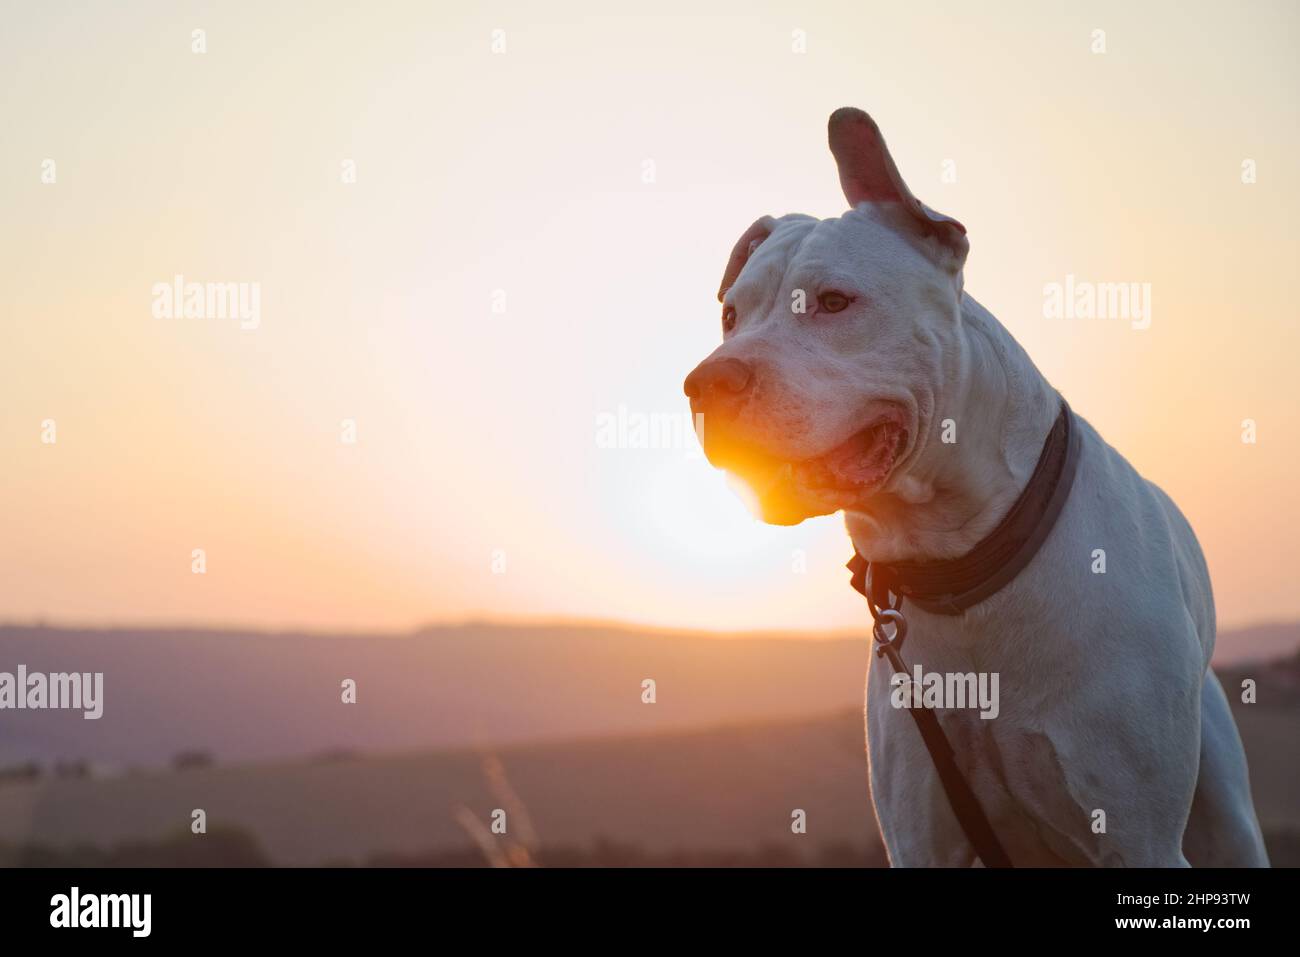 Dogo Argentino dog at sunset. Portrait of argentine dog in nature during a sunlight. Cute pet. Stock Photo